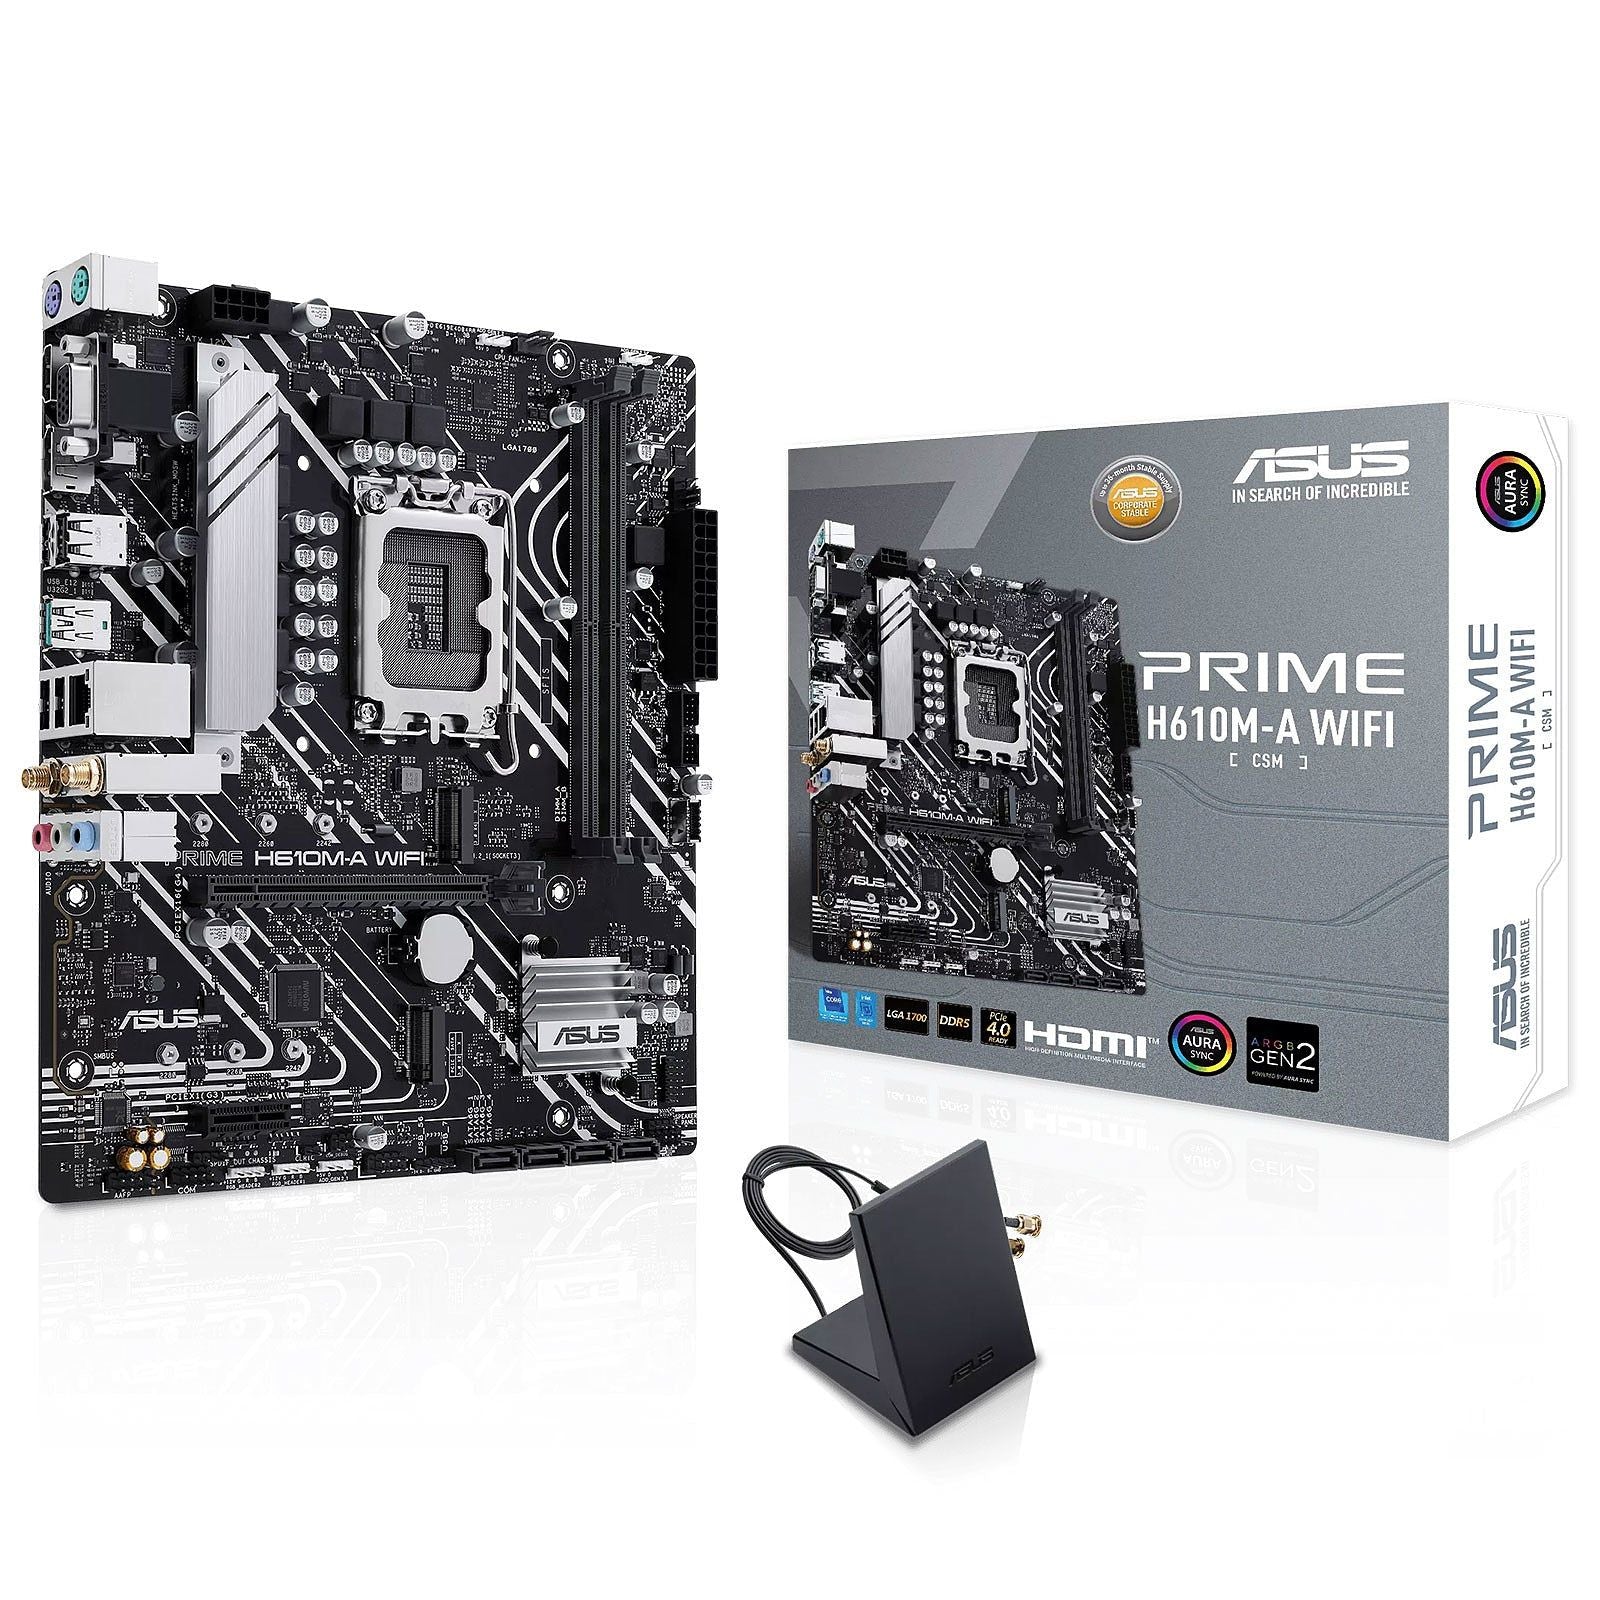 ASUS PRIME H610M-A WIFI - OVERCLOCK Computer